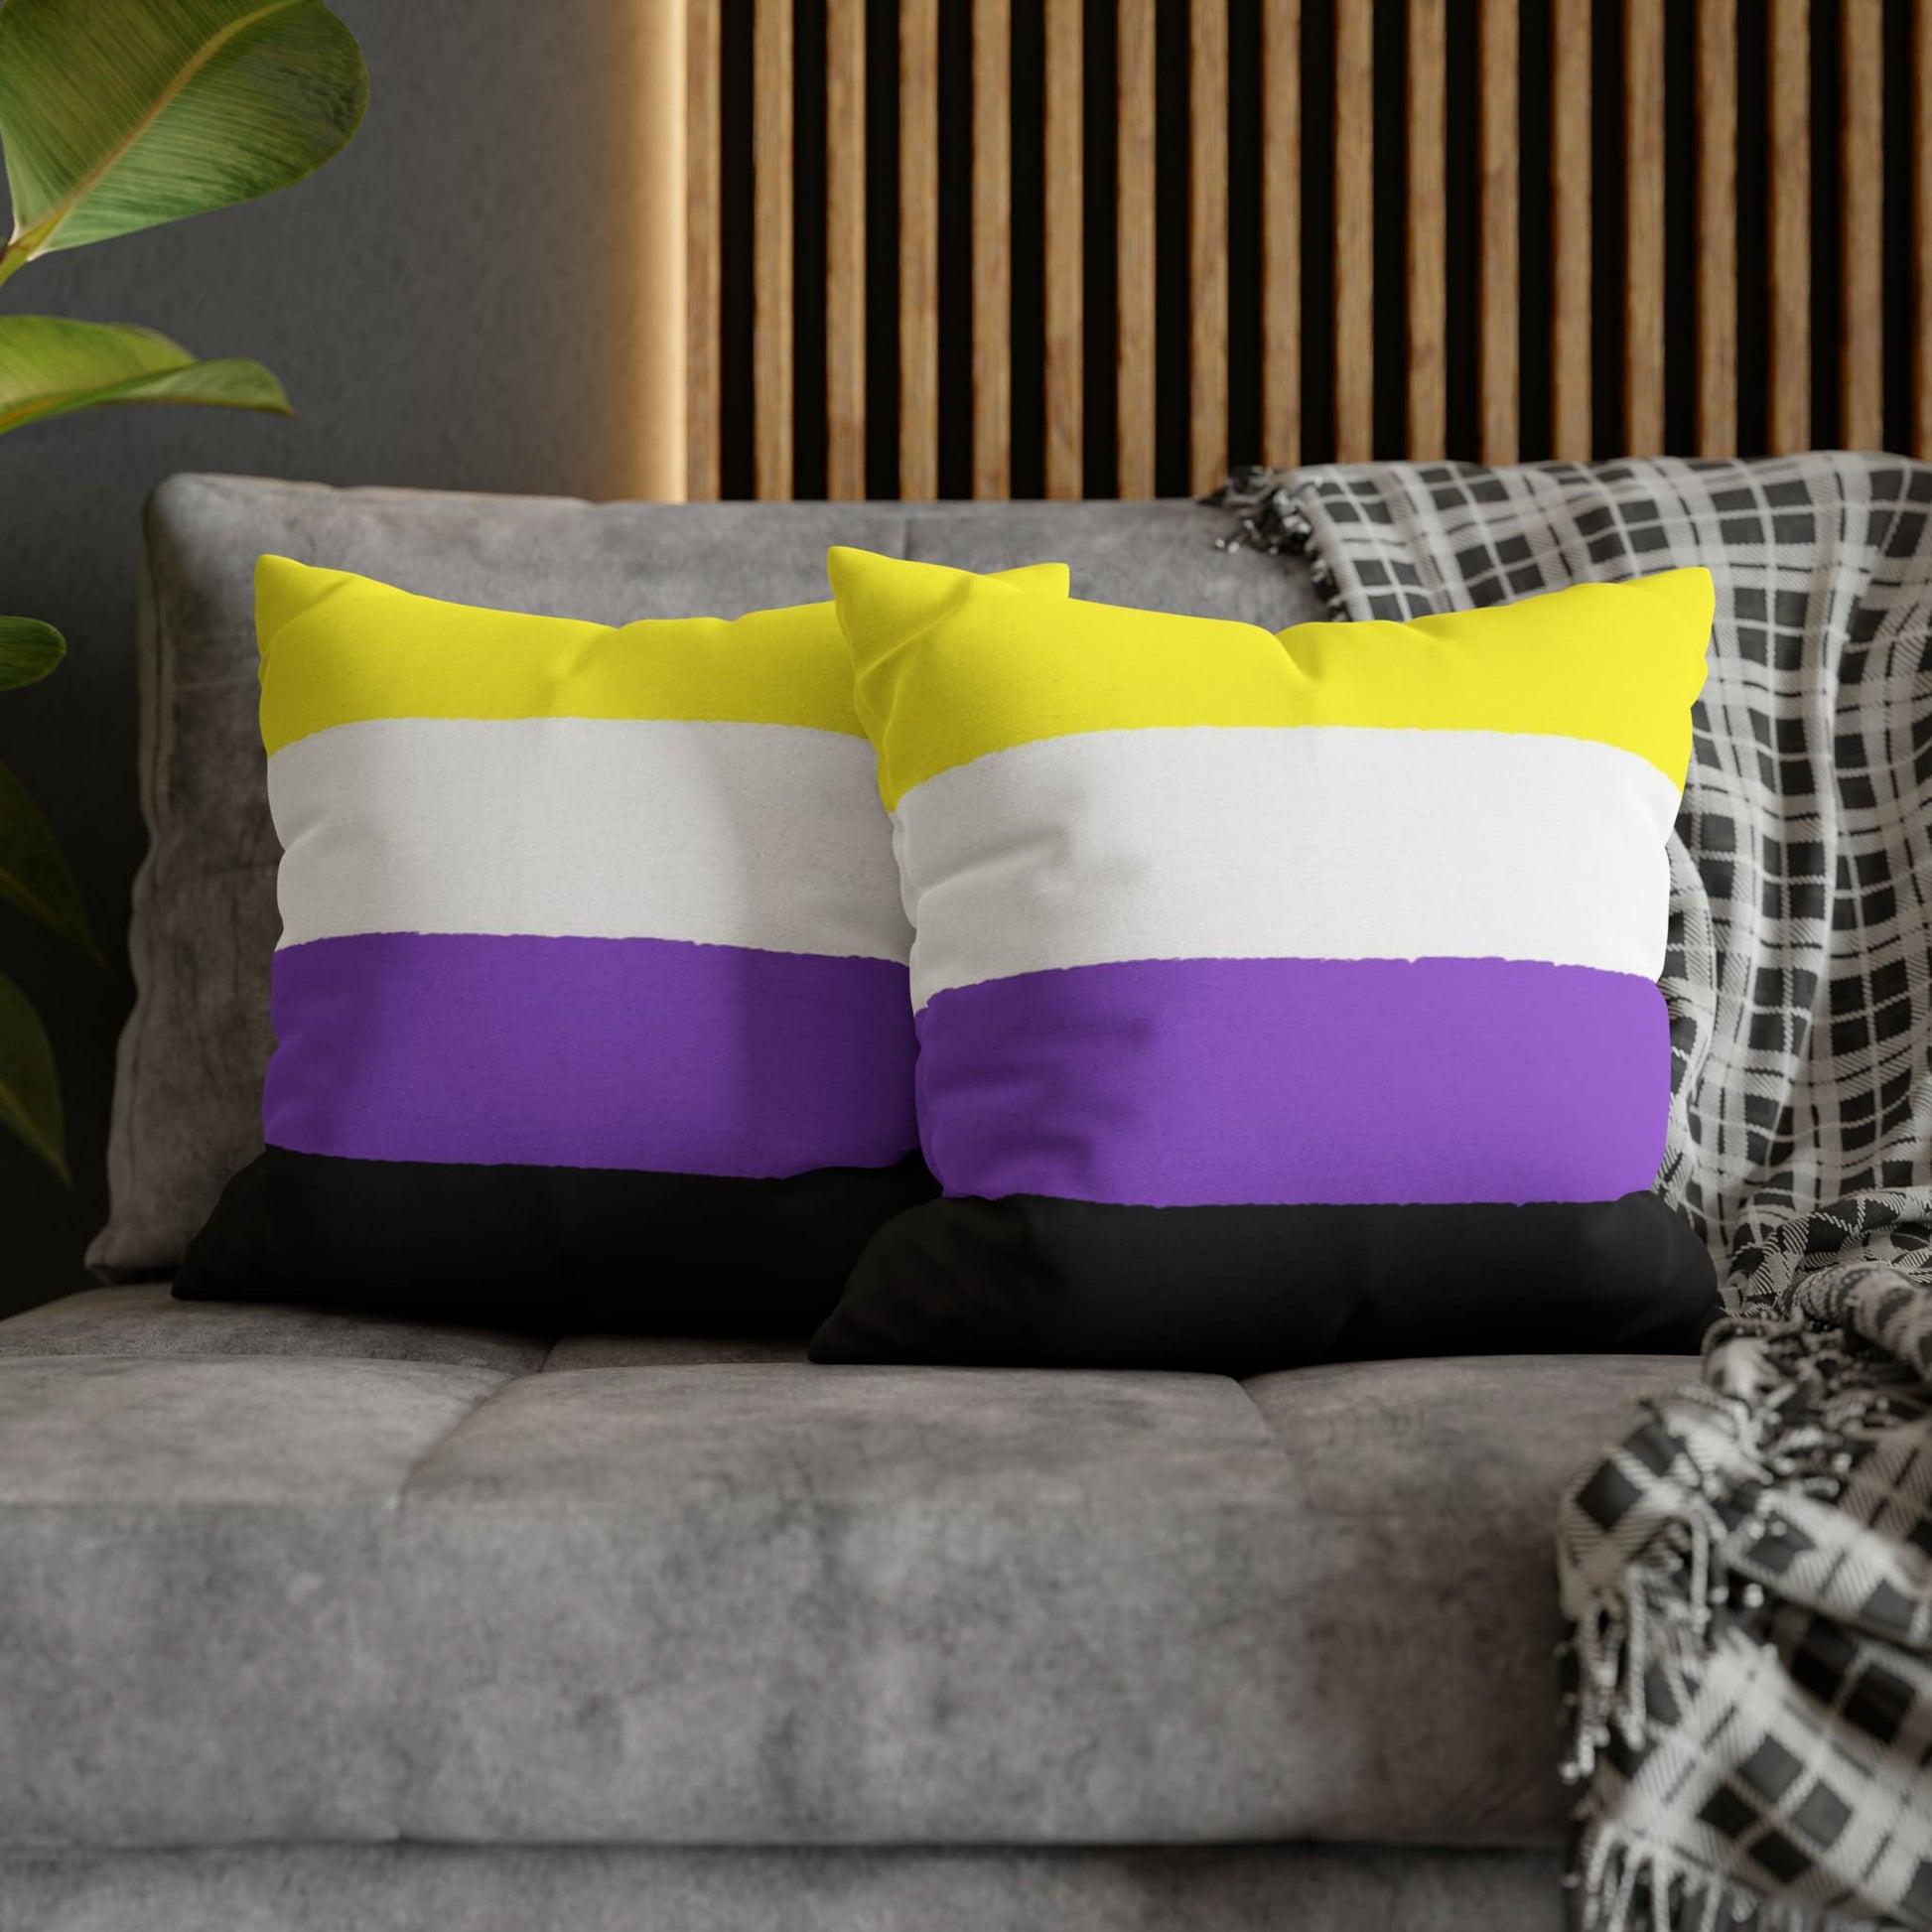 2 nonbinary pillows on couch